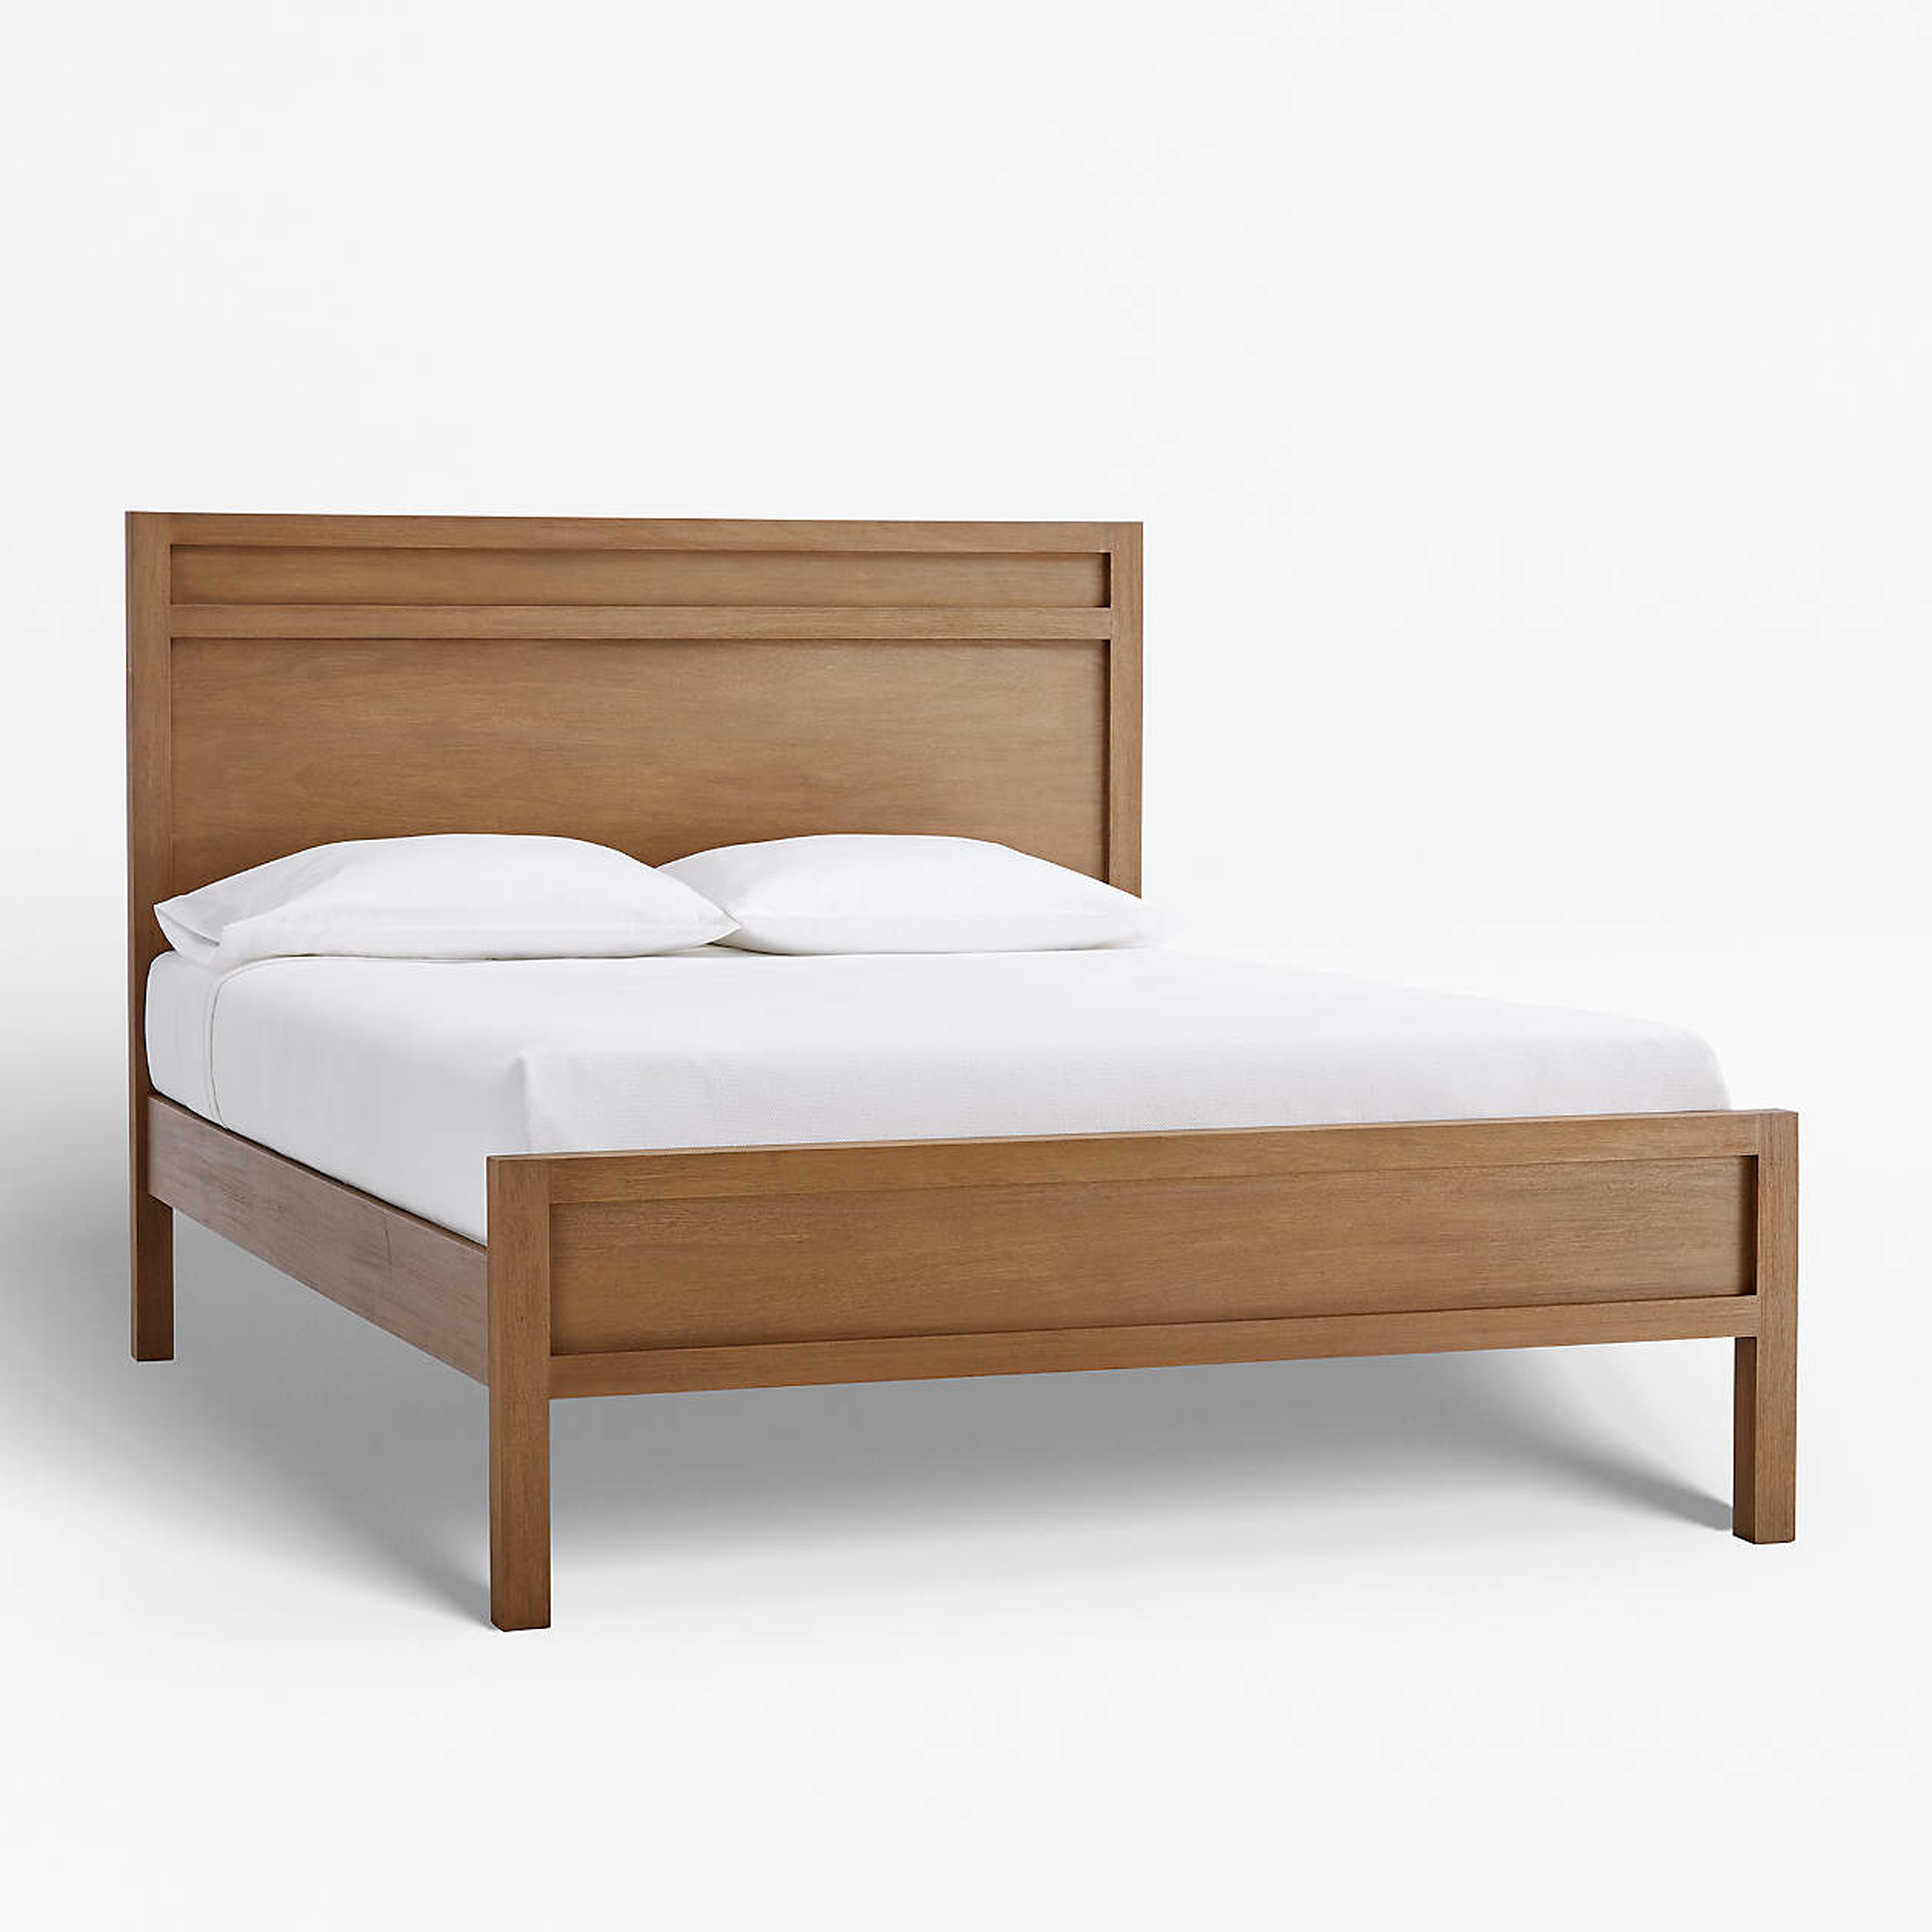 Keane Driftwood Solid Wood Queen Bed - Crate and Barrel